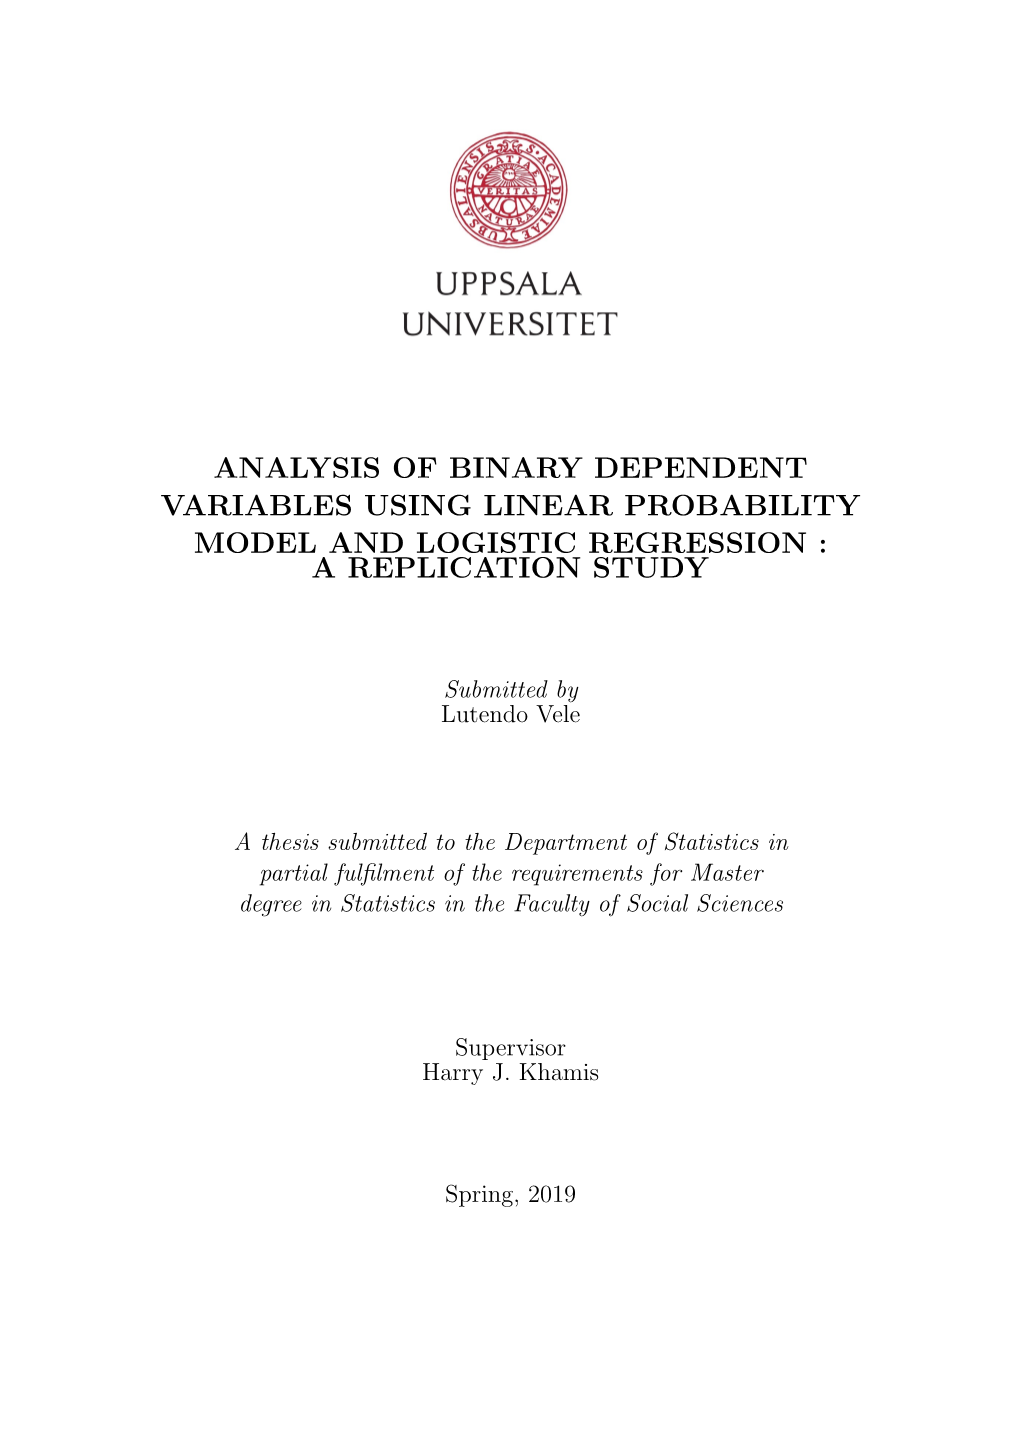 Analysis of Binary Dependent Variables Using Linear Probability Model and Logistic Regression : a Replication Study